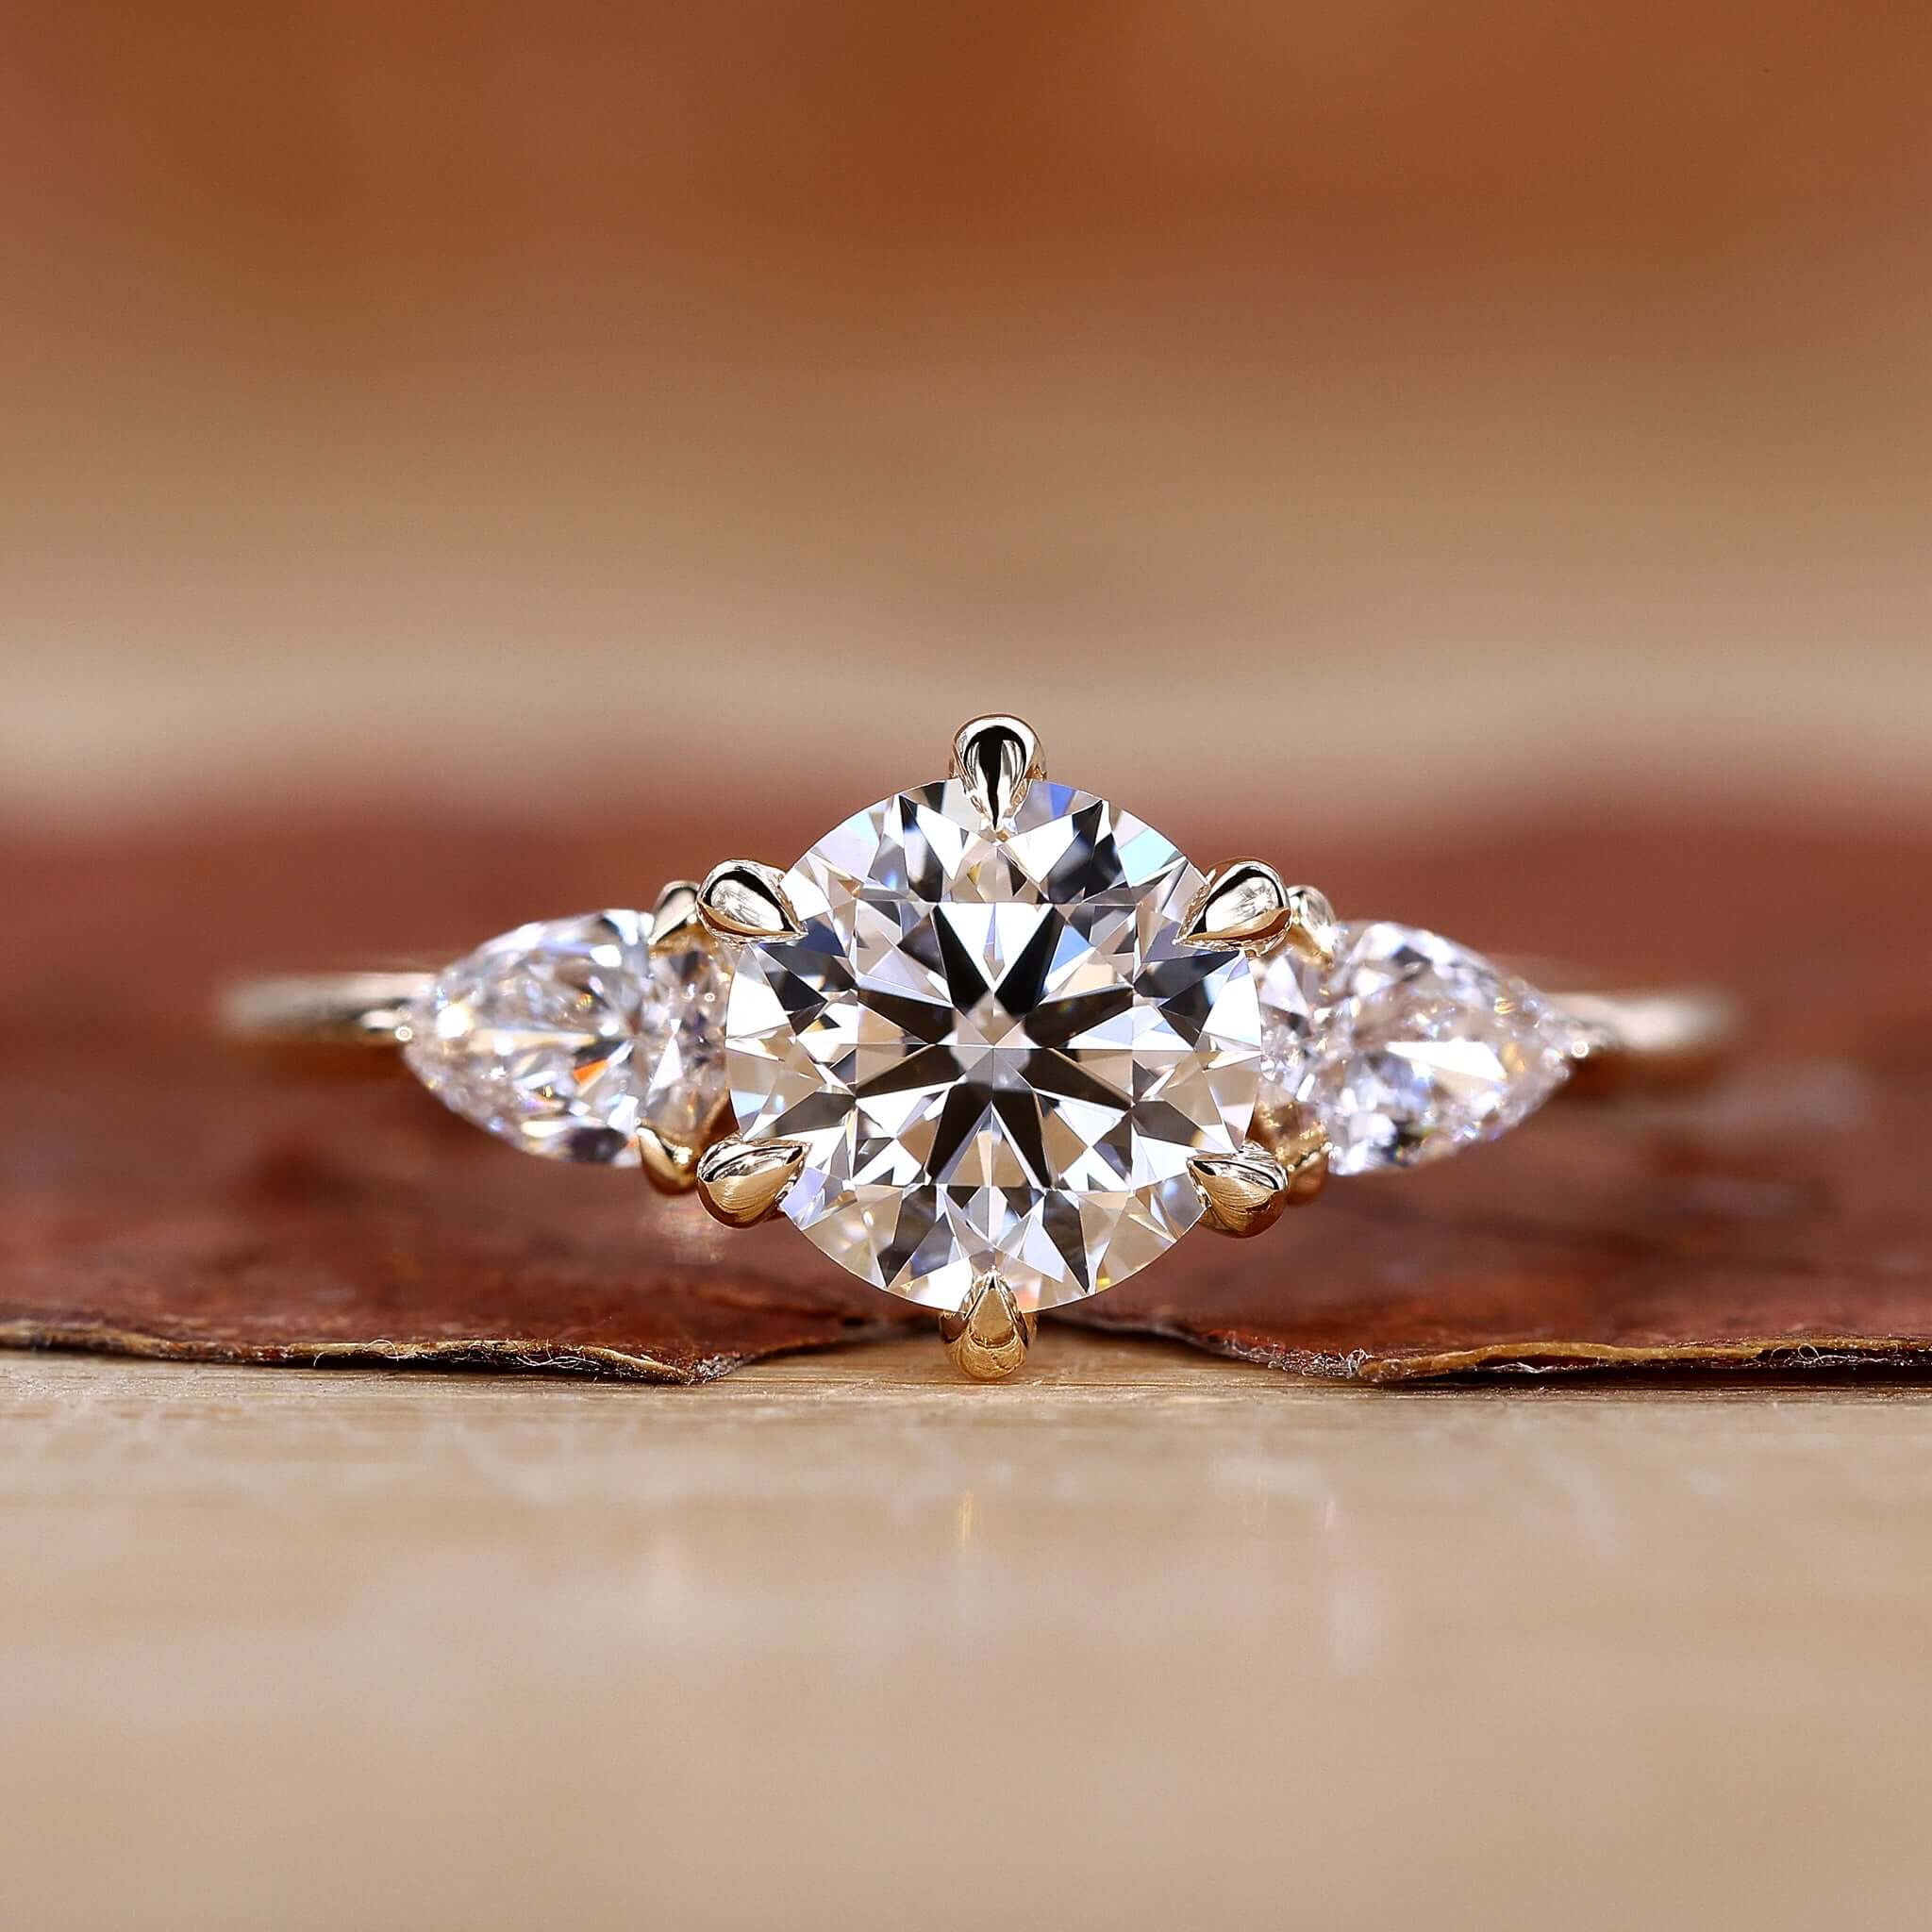 Exquisite three stone lab-grown diamond ring, symbolizing a sustainable and modern love.